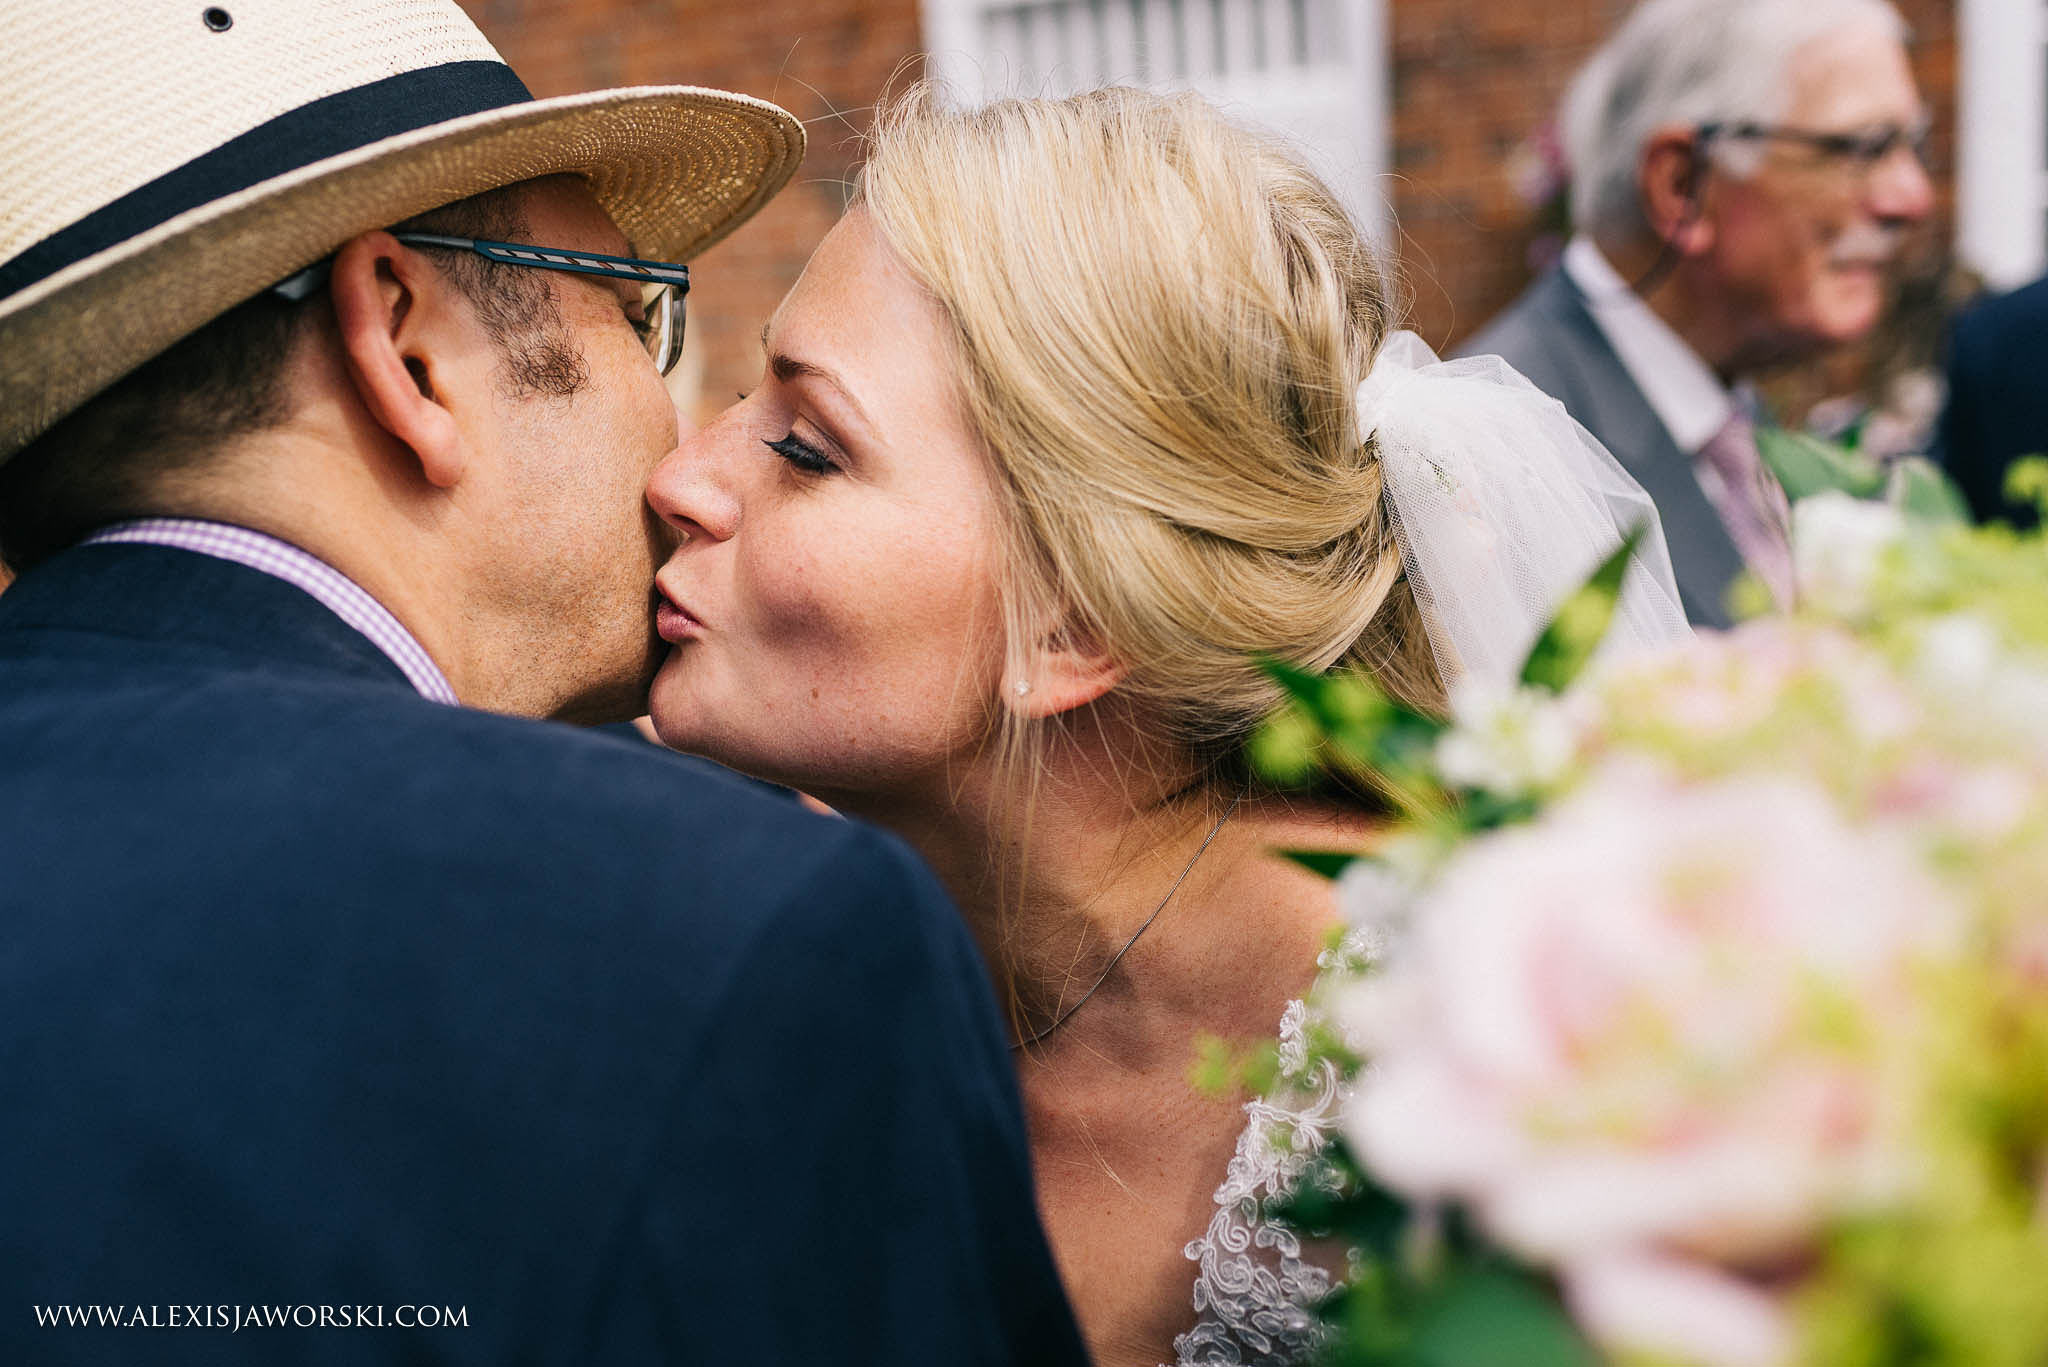 bride kissing a guest on the cheek